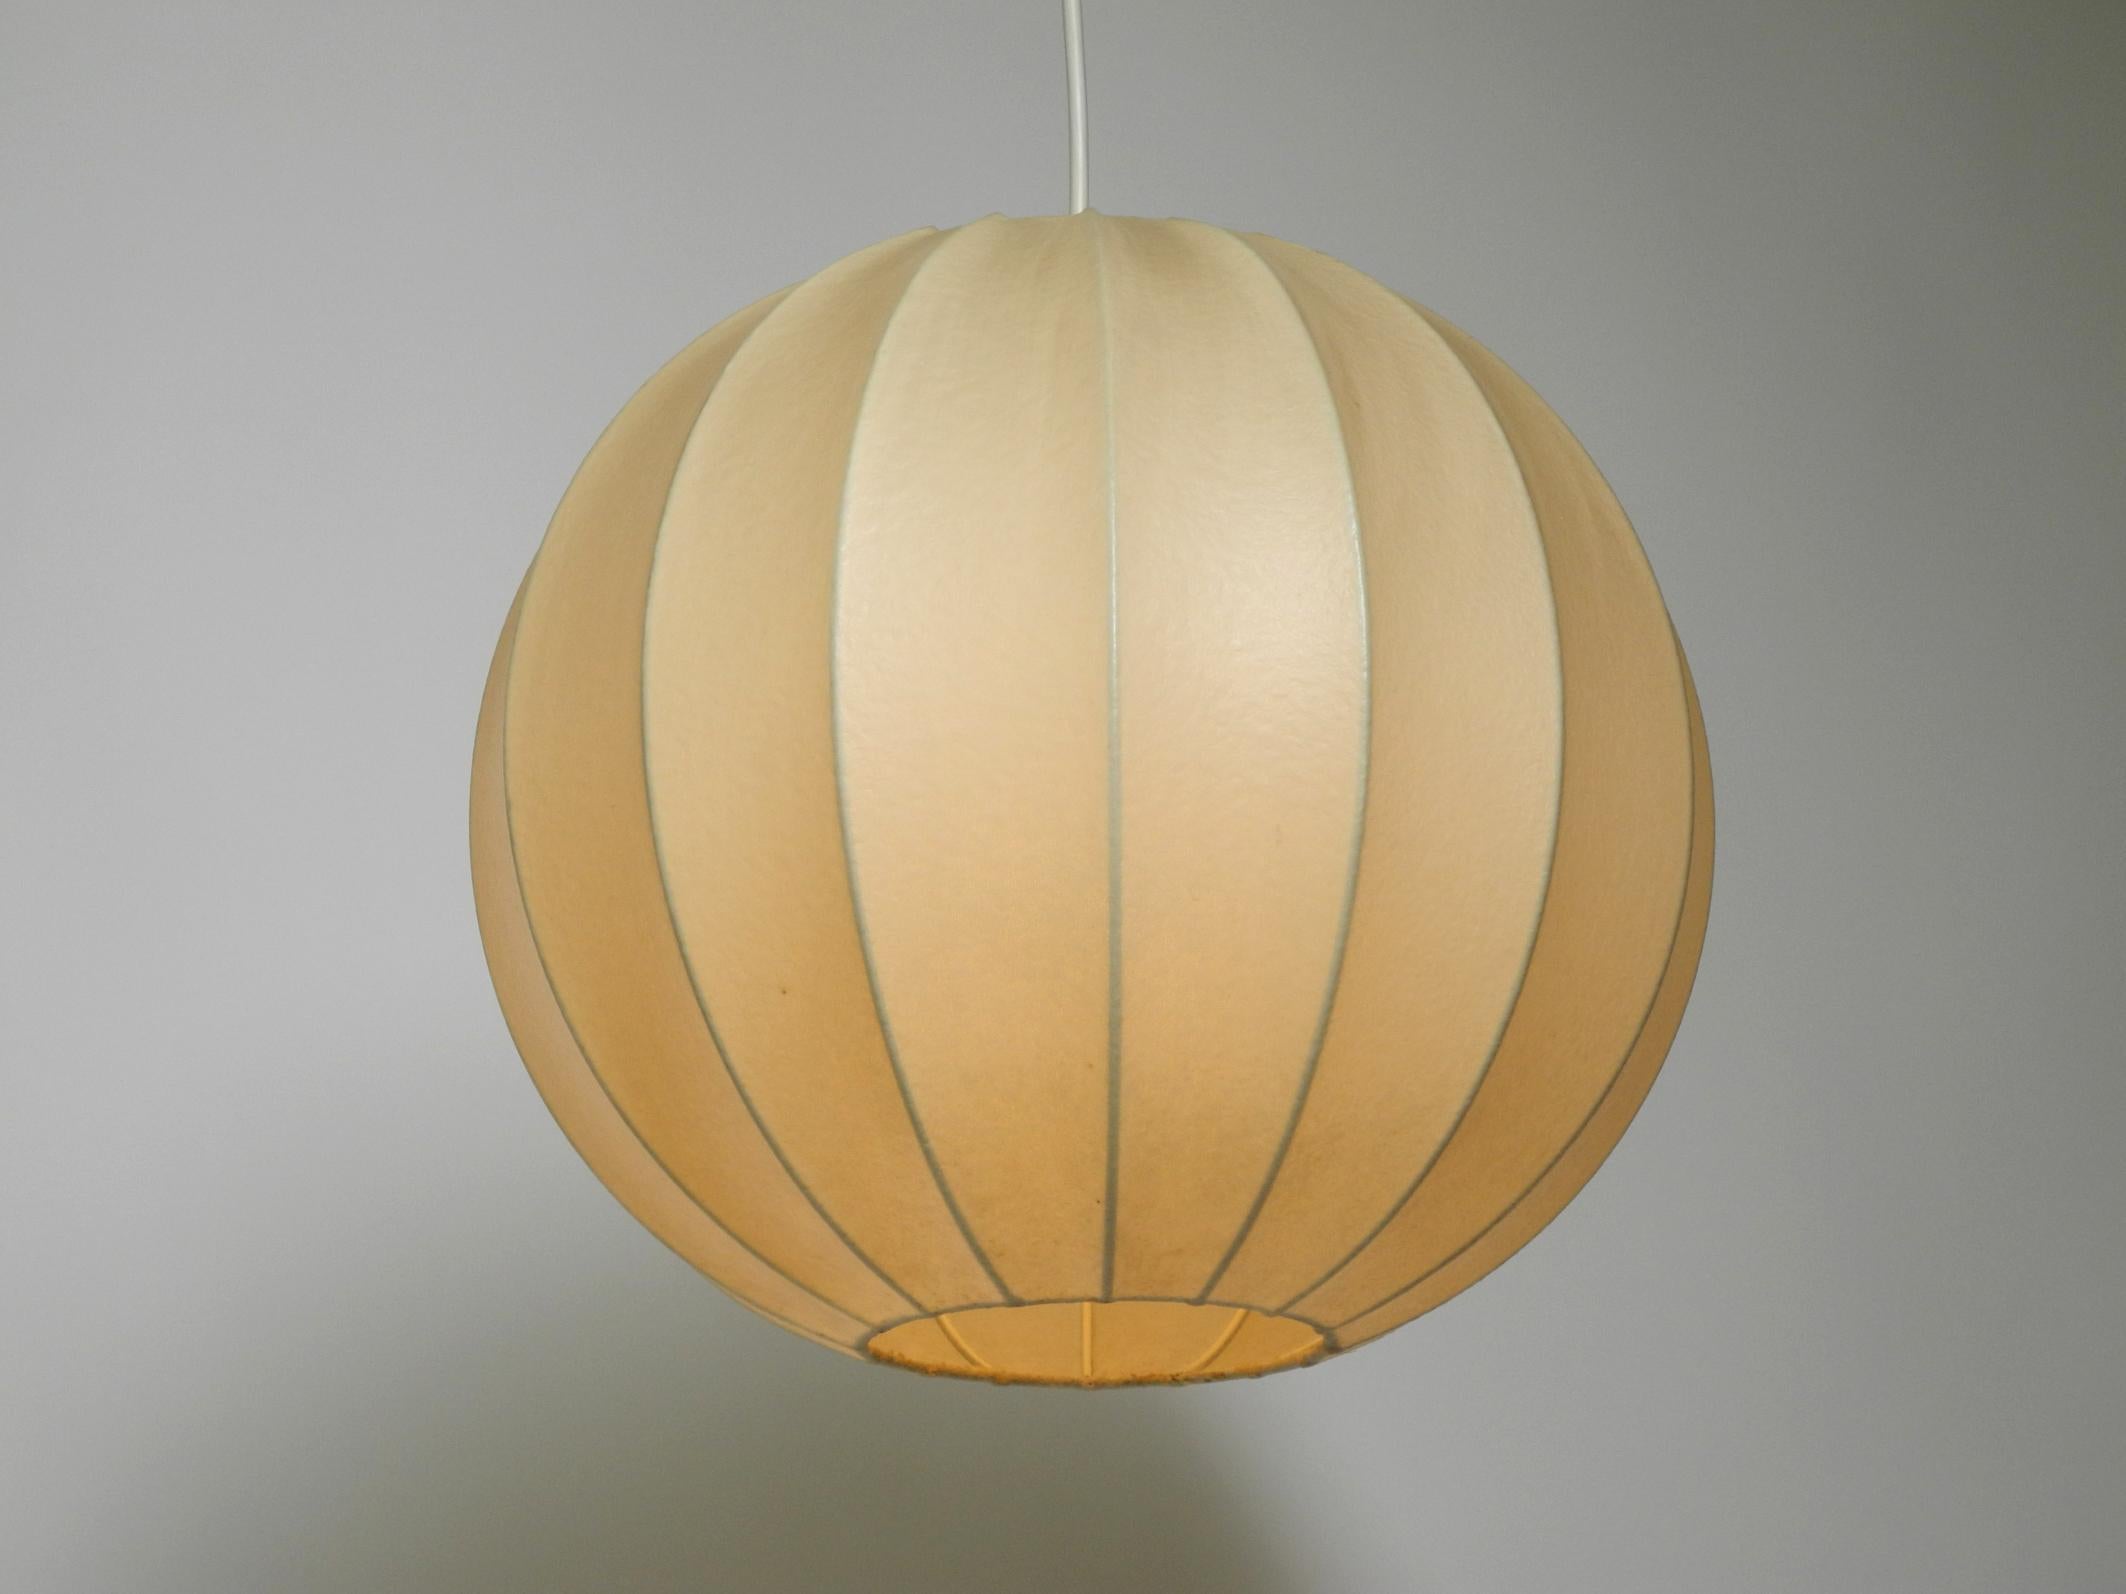 Beautiful 1960s ball cocoon pendant lamp in very good original vintage condition.
Great minimalist design. Creates a very pleasant warm light.
The lampshade has no damage. No holes or tears.
One original E27 brass socket and fully functional. With